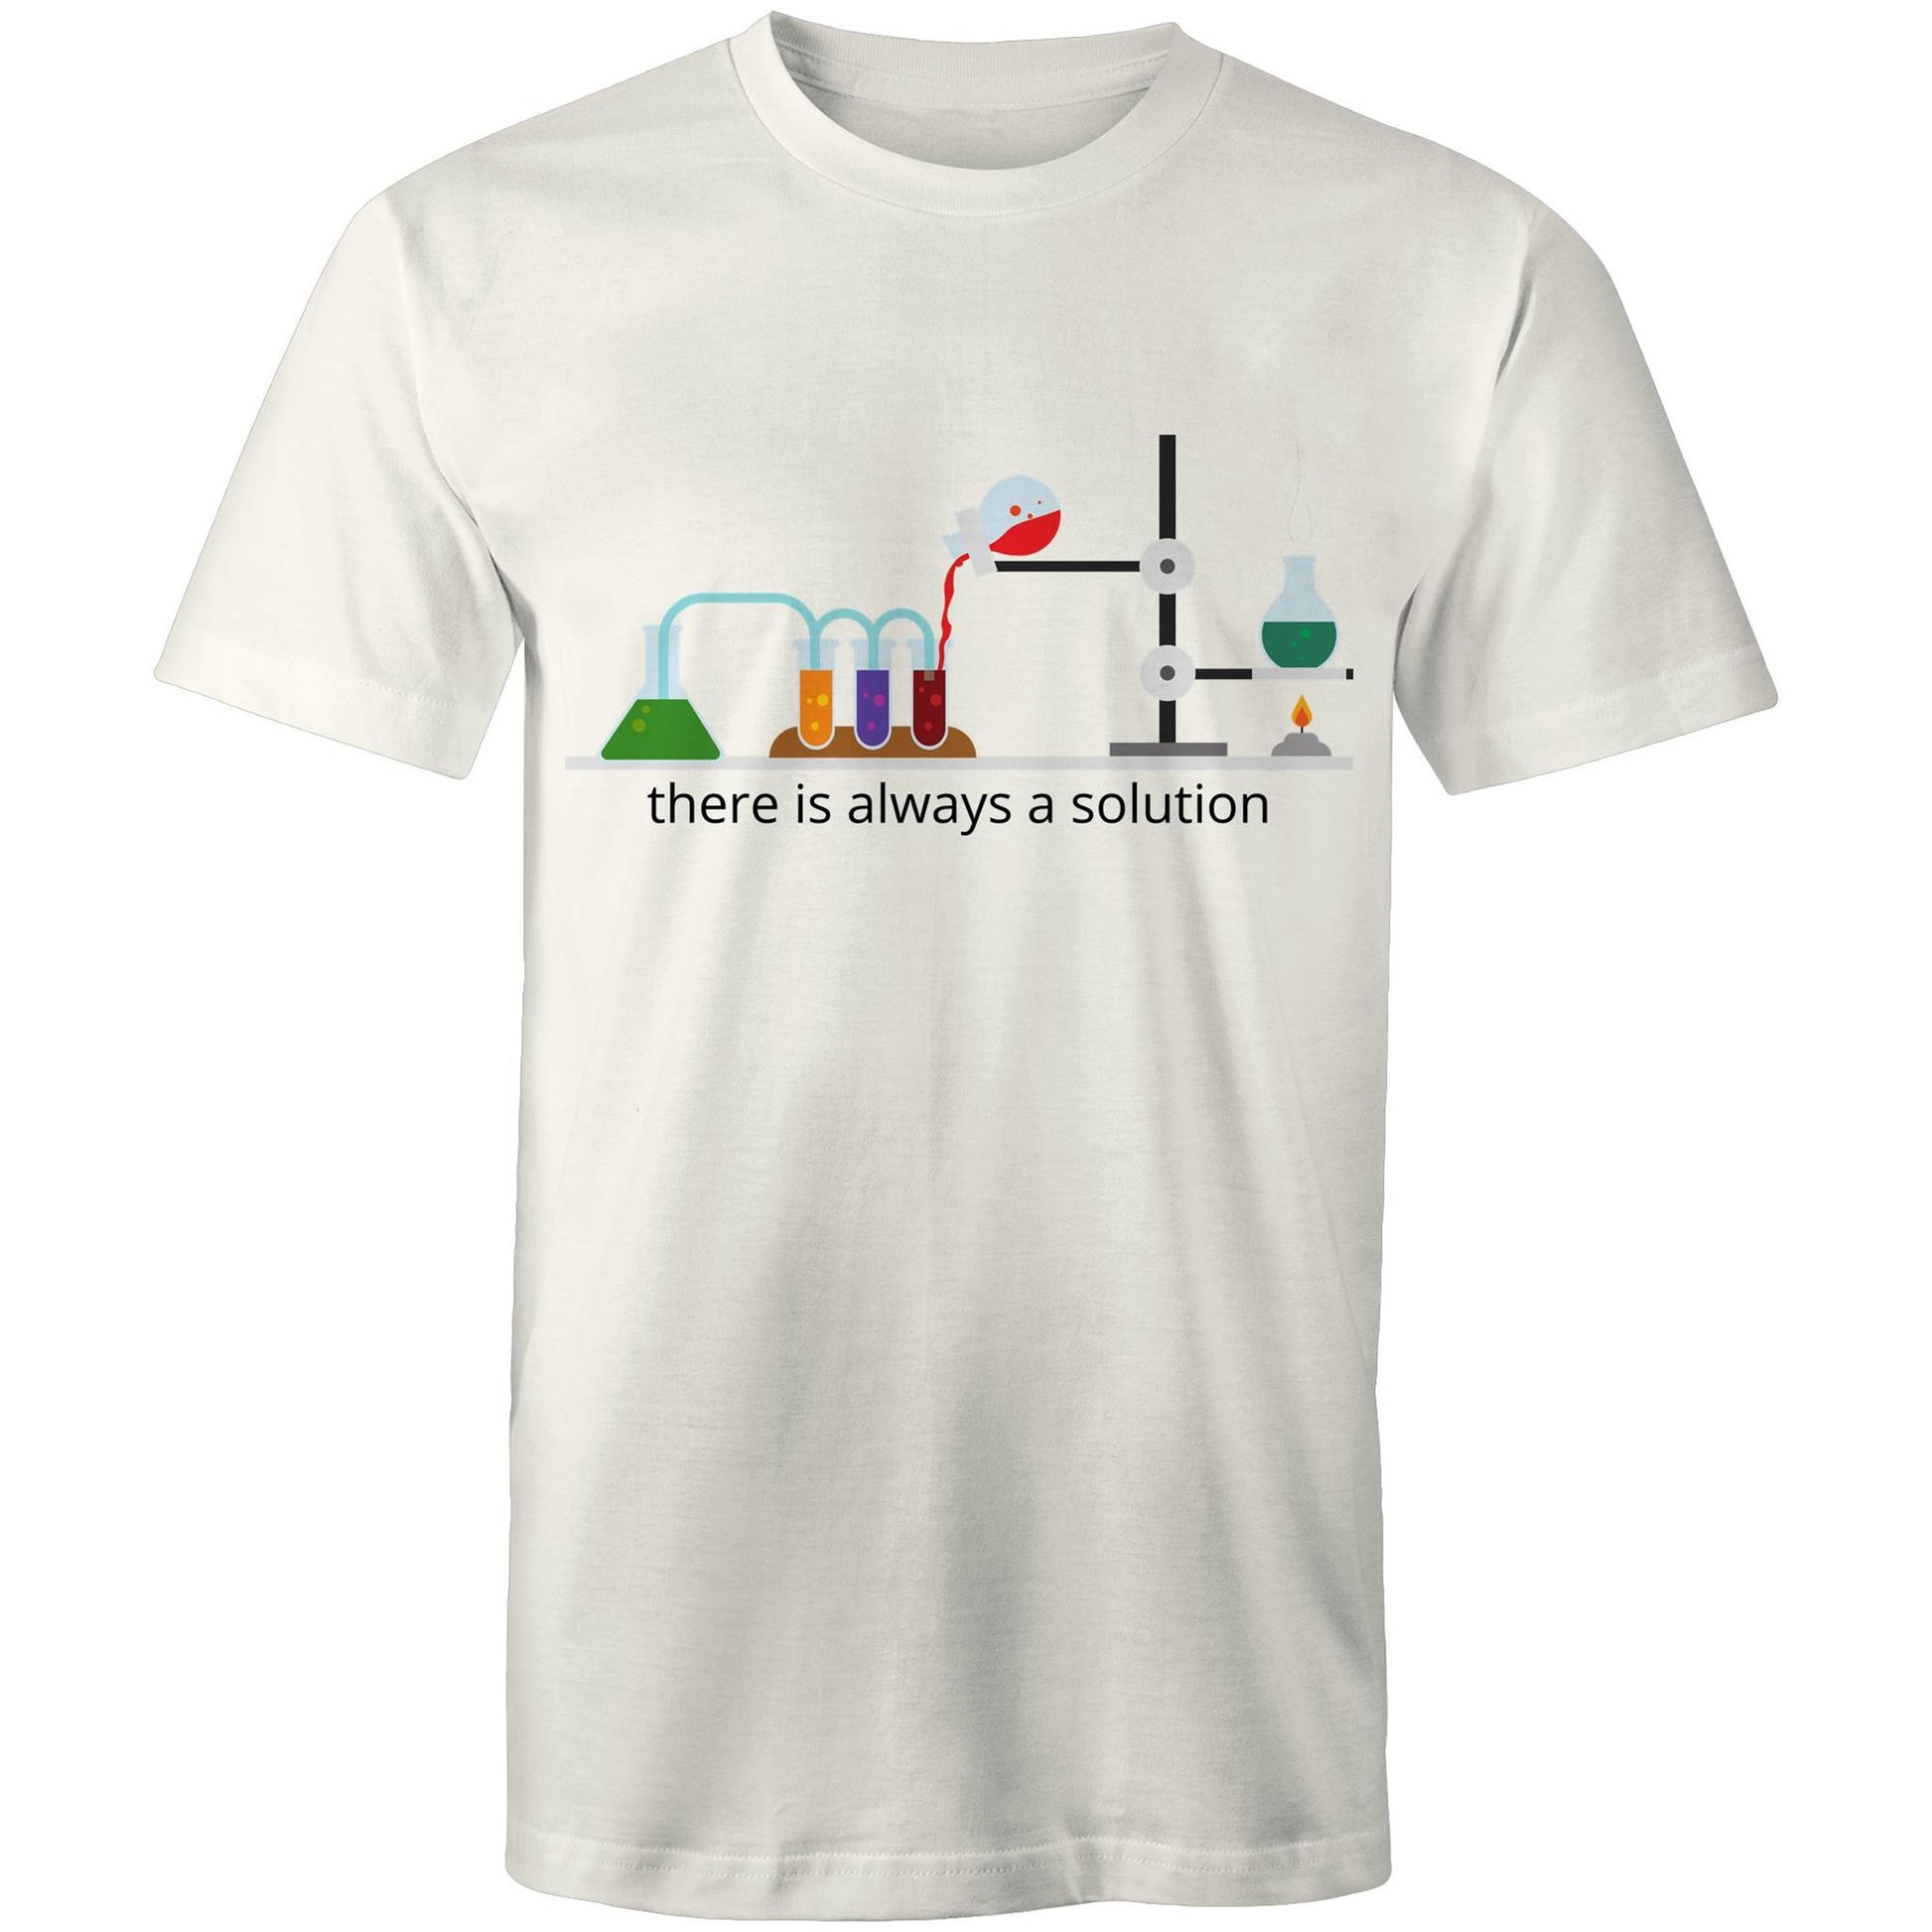 There Is Always A Solution, In Colour - Mens T-Shirt Natural Mens T-shirt Mens Science